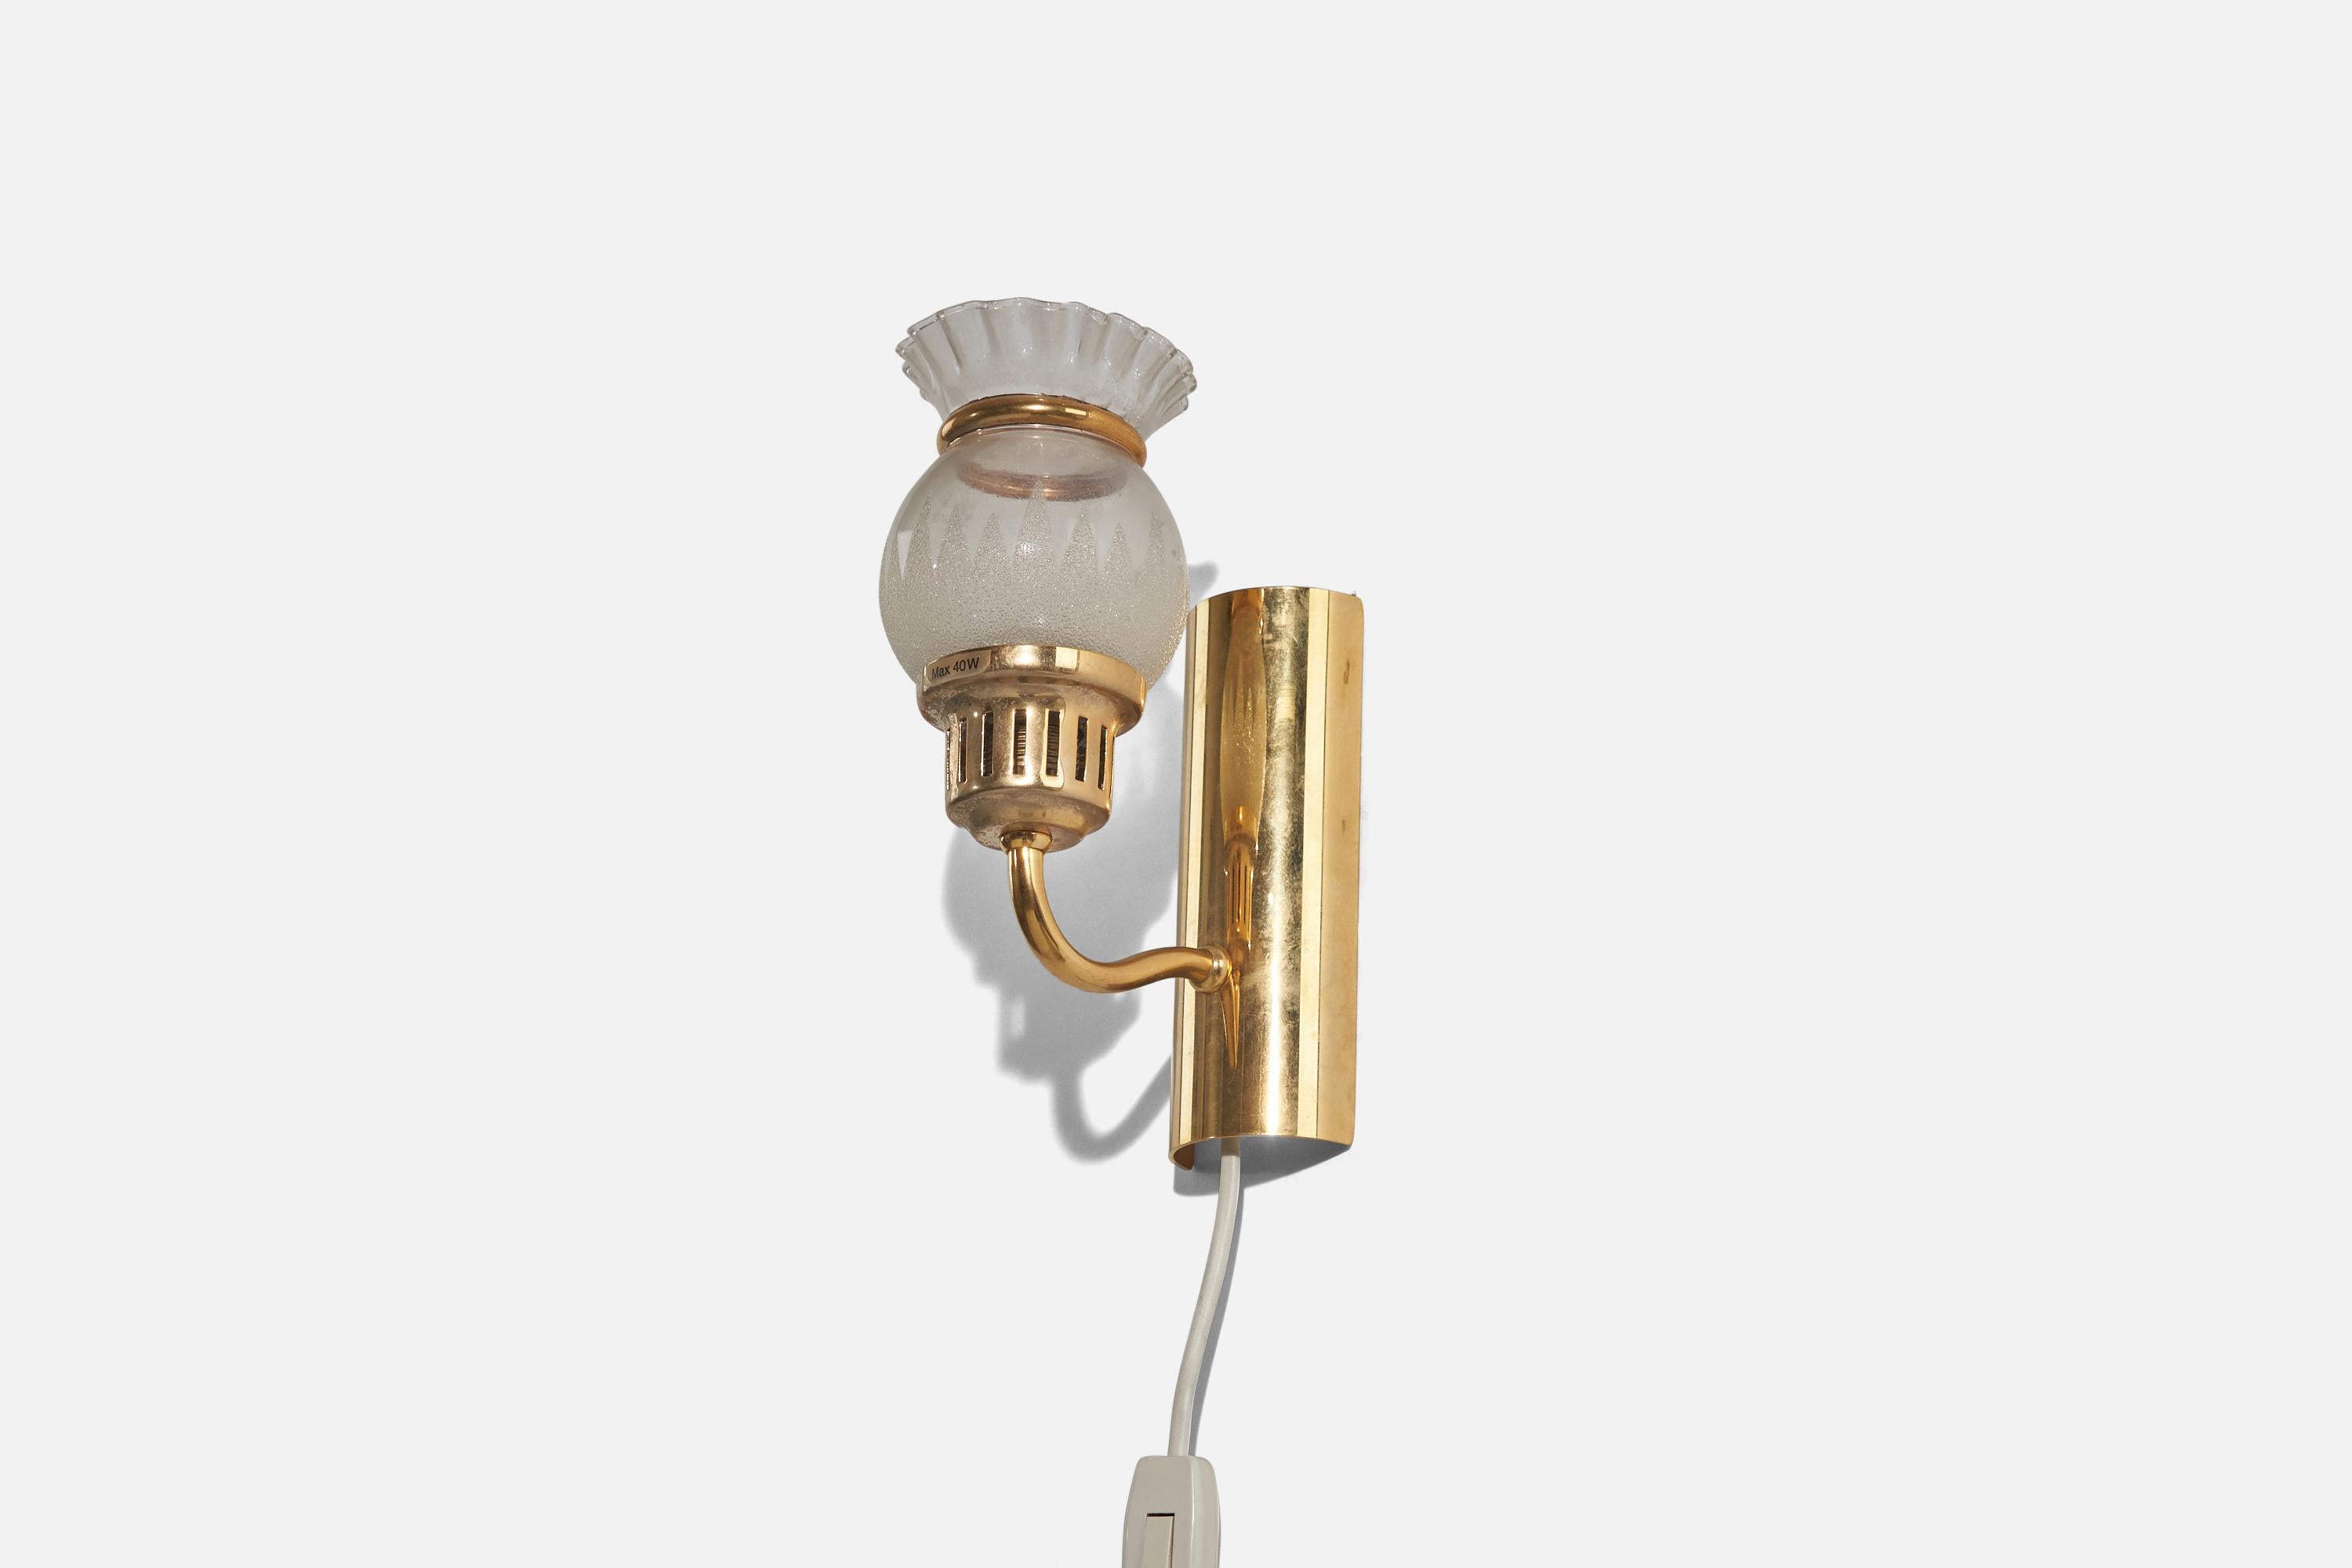 A pair of brass and glass sconces designed and produced in Sweden, circa 1970s. 

Dimensions of back plate (inches) : 6.5 x 2.37 x 1.06 (Height x Width x Depth).

Socket takes E-14 bulb.
There is no maximum wattage stated on the fixture.